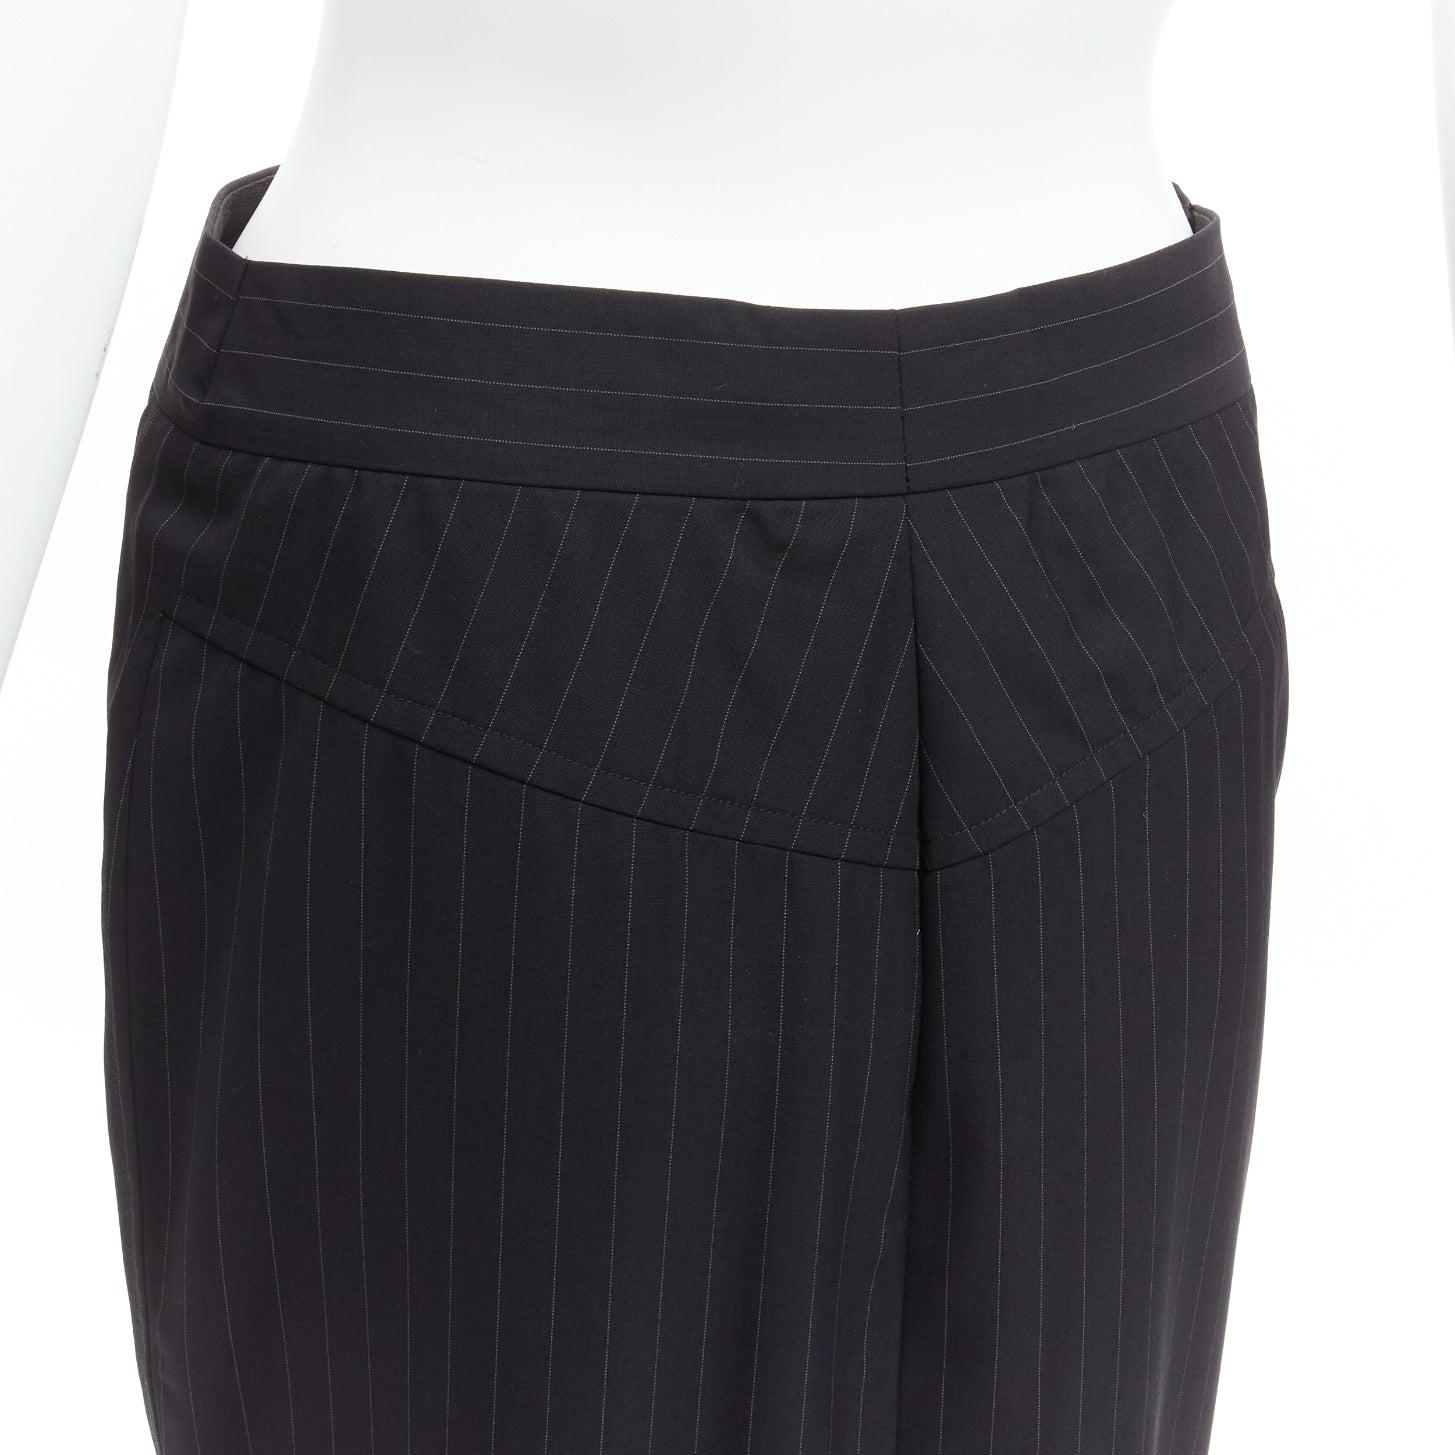 GUCCI Tom Ford Vintage black pinstripe 100% wool mid waist pencil skirt IT40 S
Reference: GIYG/A00369
Brand: Gucci
Designer: Tom Ford
Material: Wool
Color: Black, White
Pattern: Pinstriped
Closure: Zip Fly
Lining: Black Fabric
Extra Details: Front